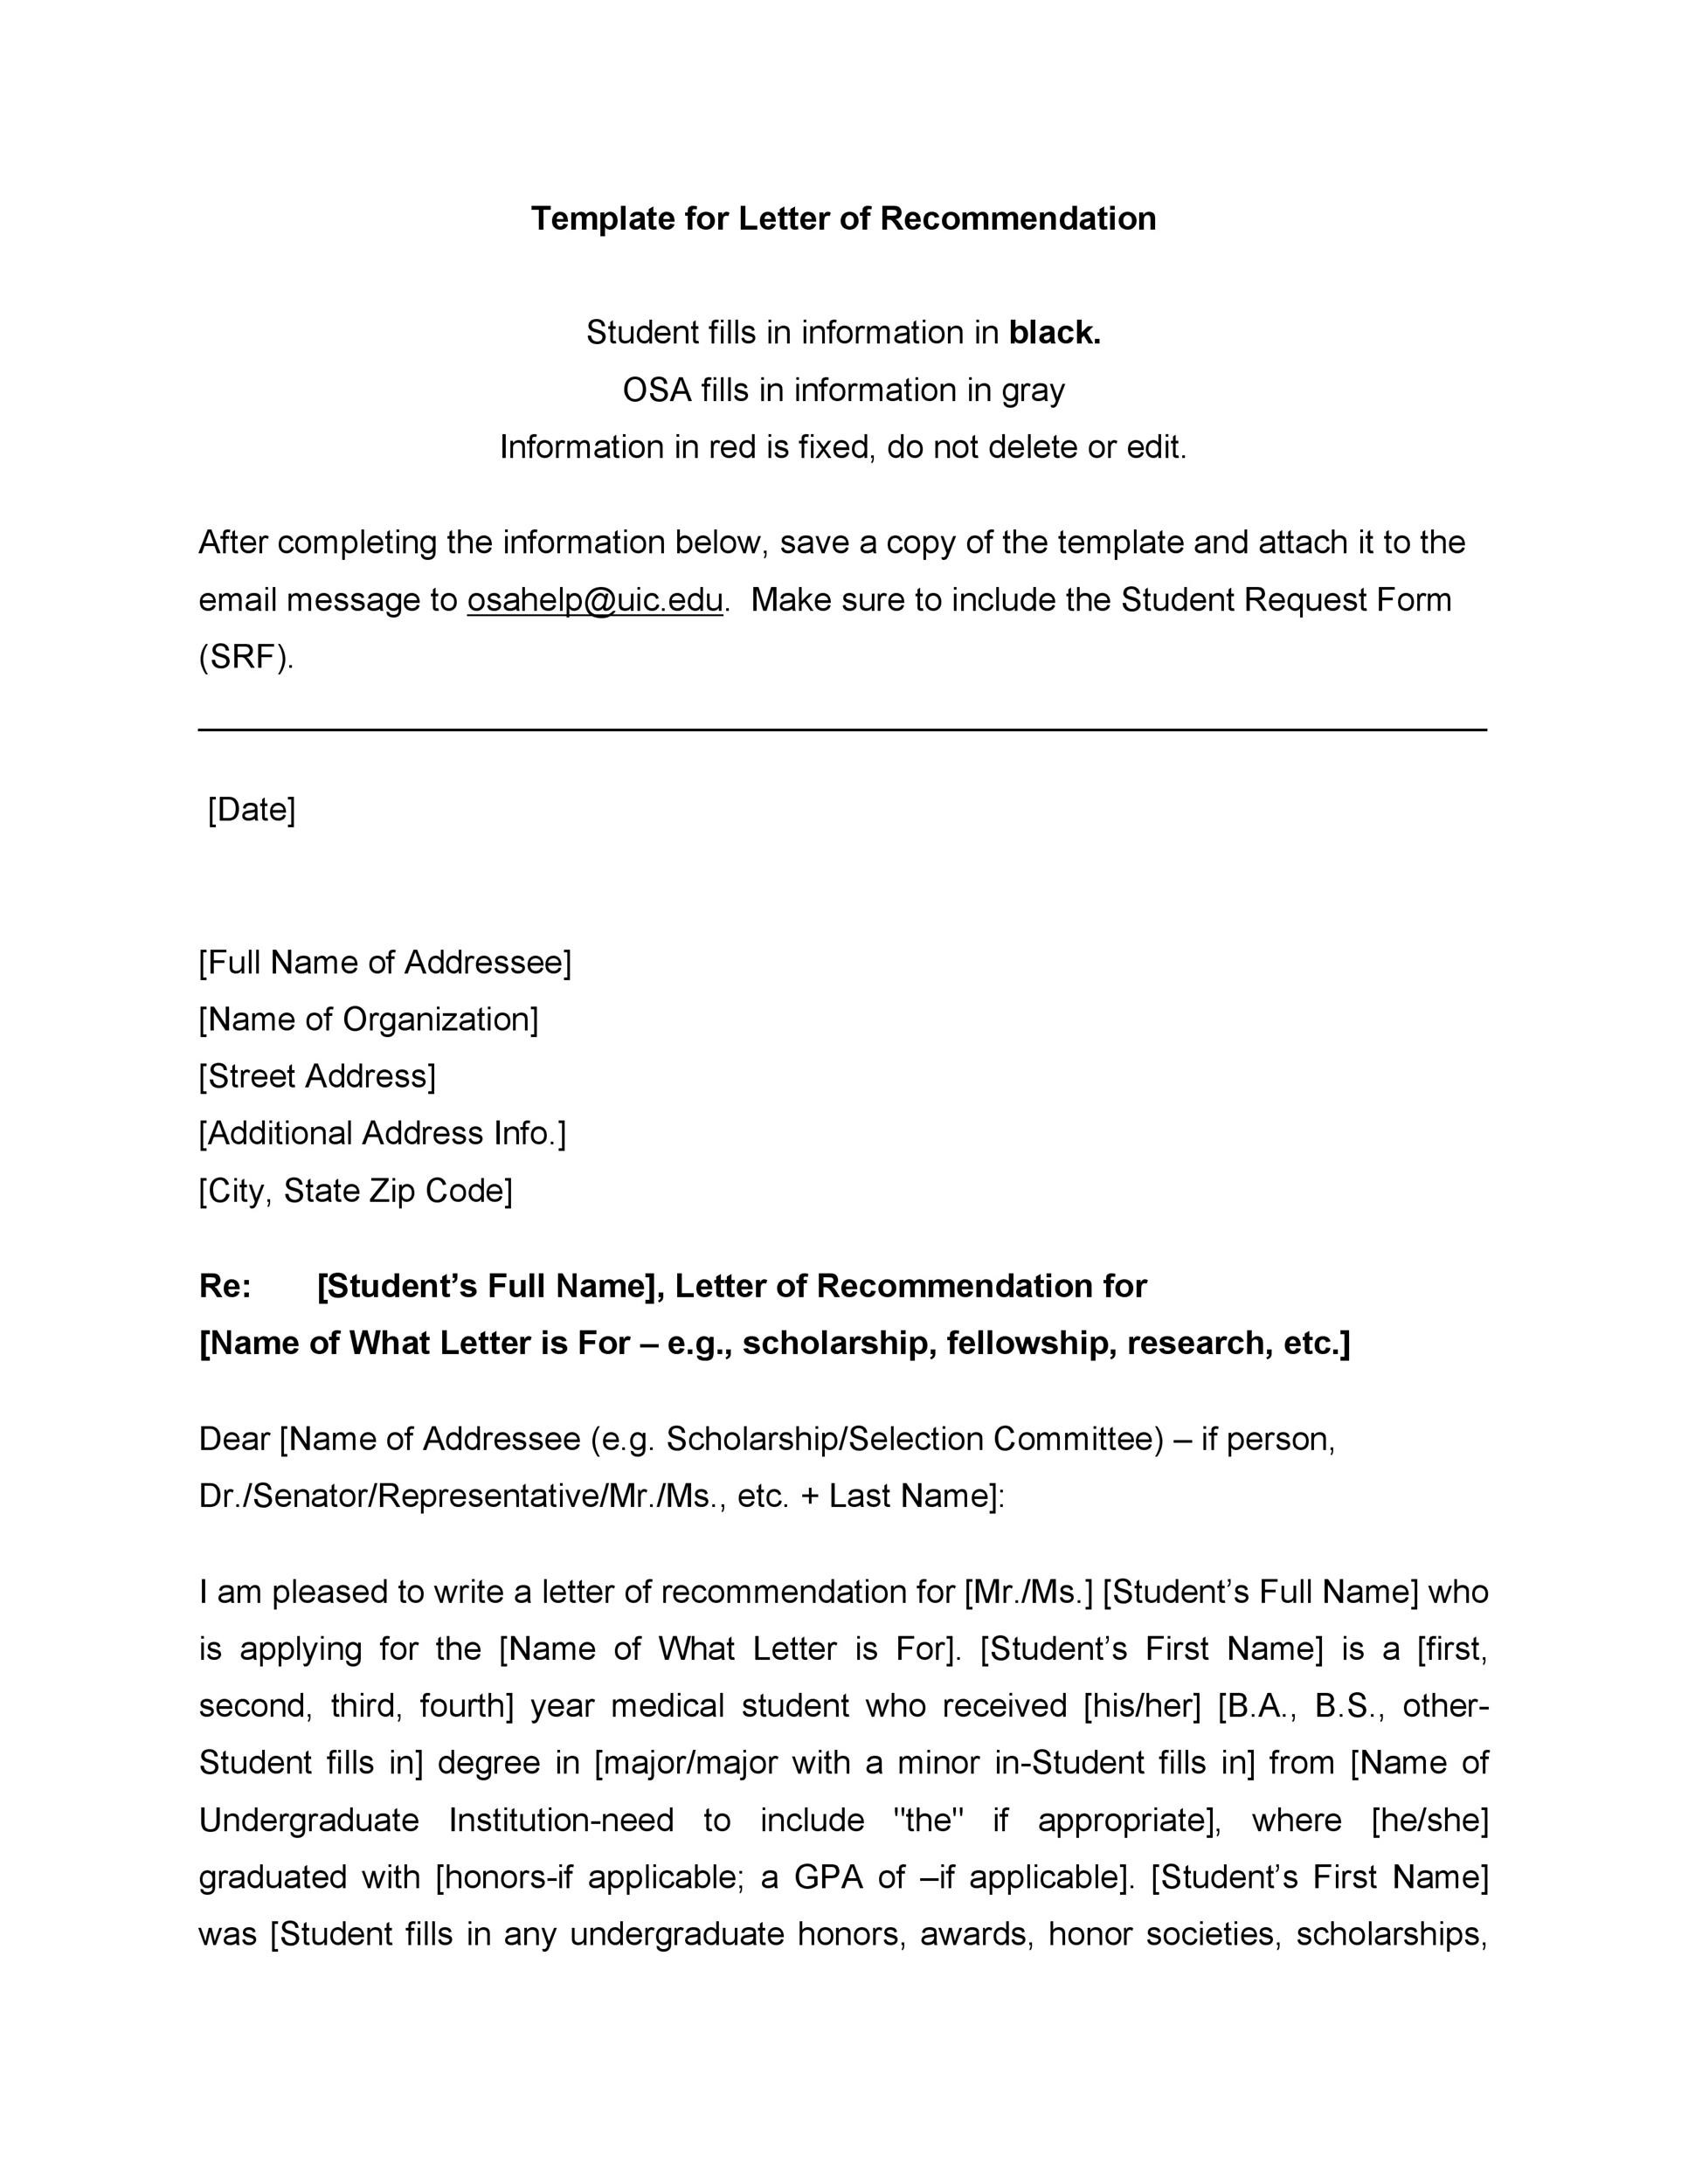 Student Letter Of Recommendation For Scholarship from templatelab.com